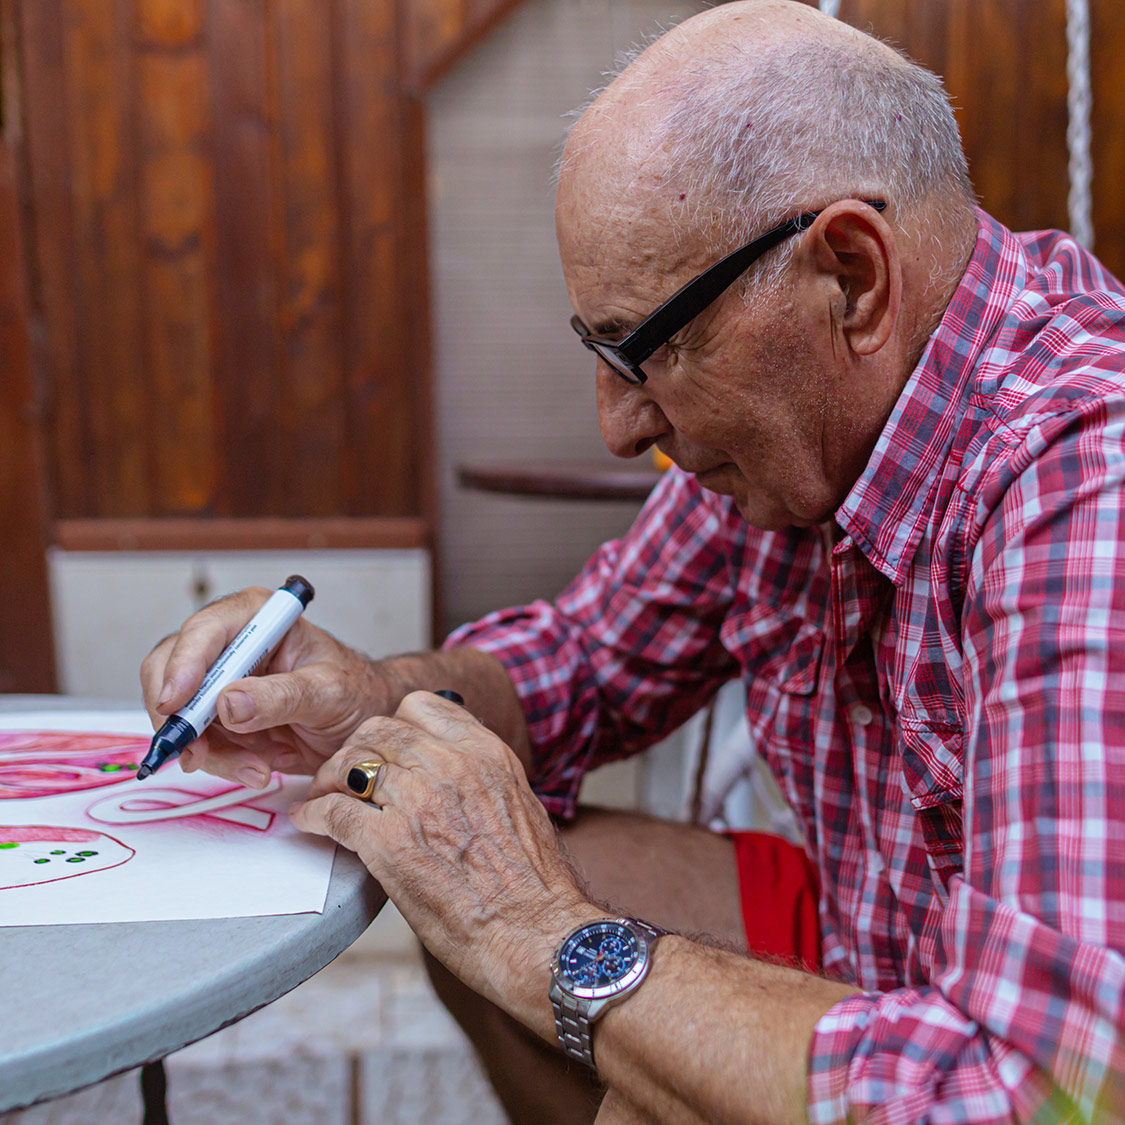 Male patient during art therapy